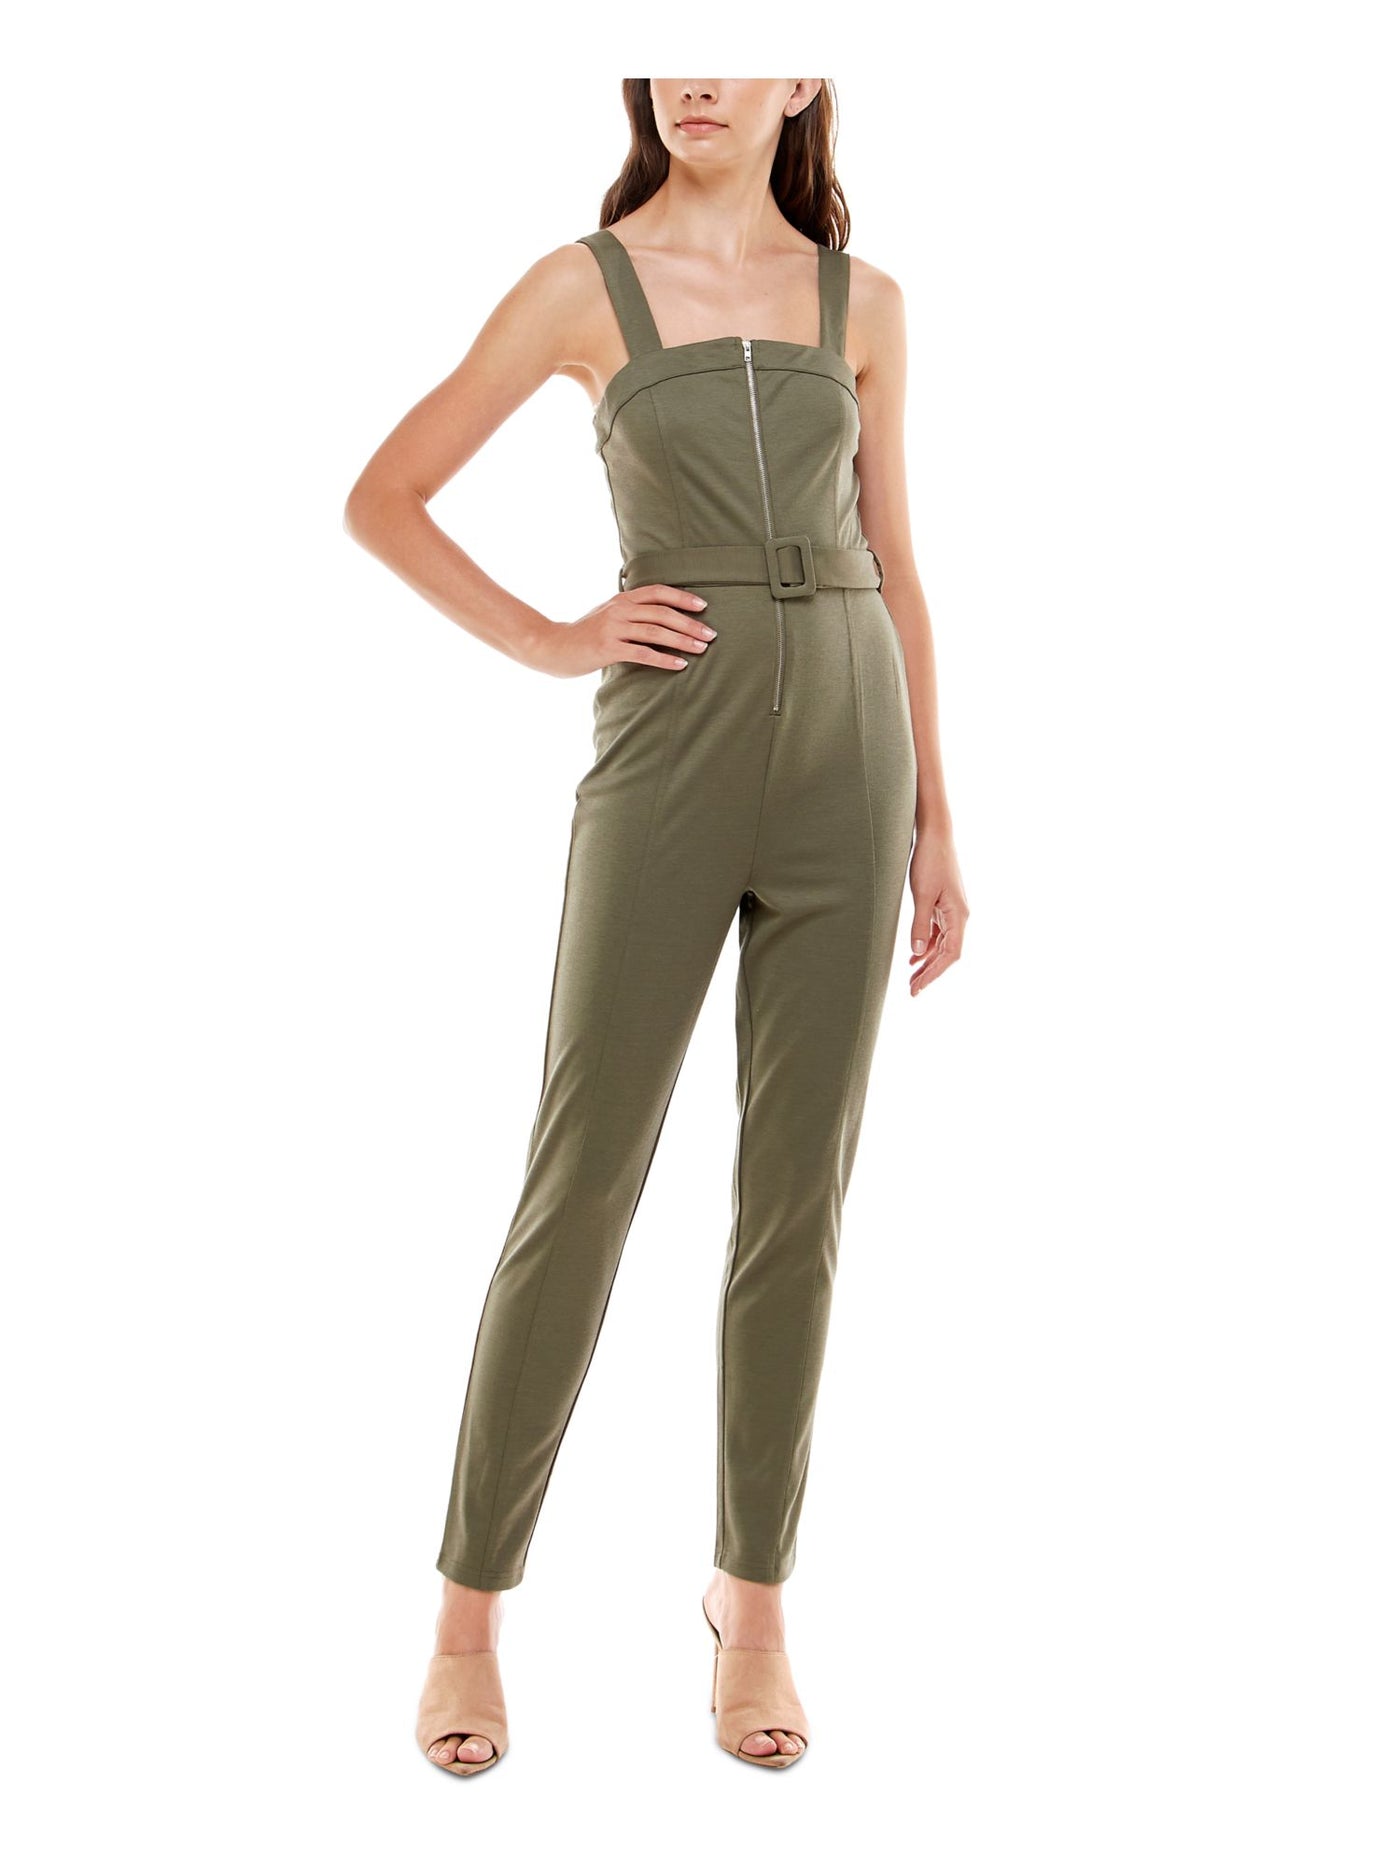 ALMOST FAMOUS Womens Green Belted Zippered Sleeveless Square Neck Skinny Jumpsuit Juniors M